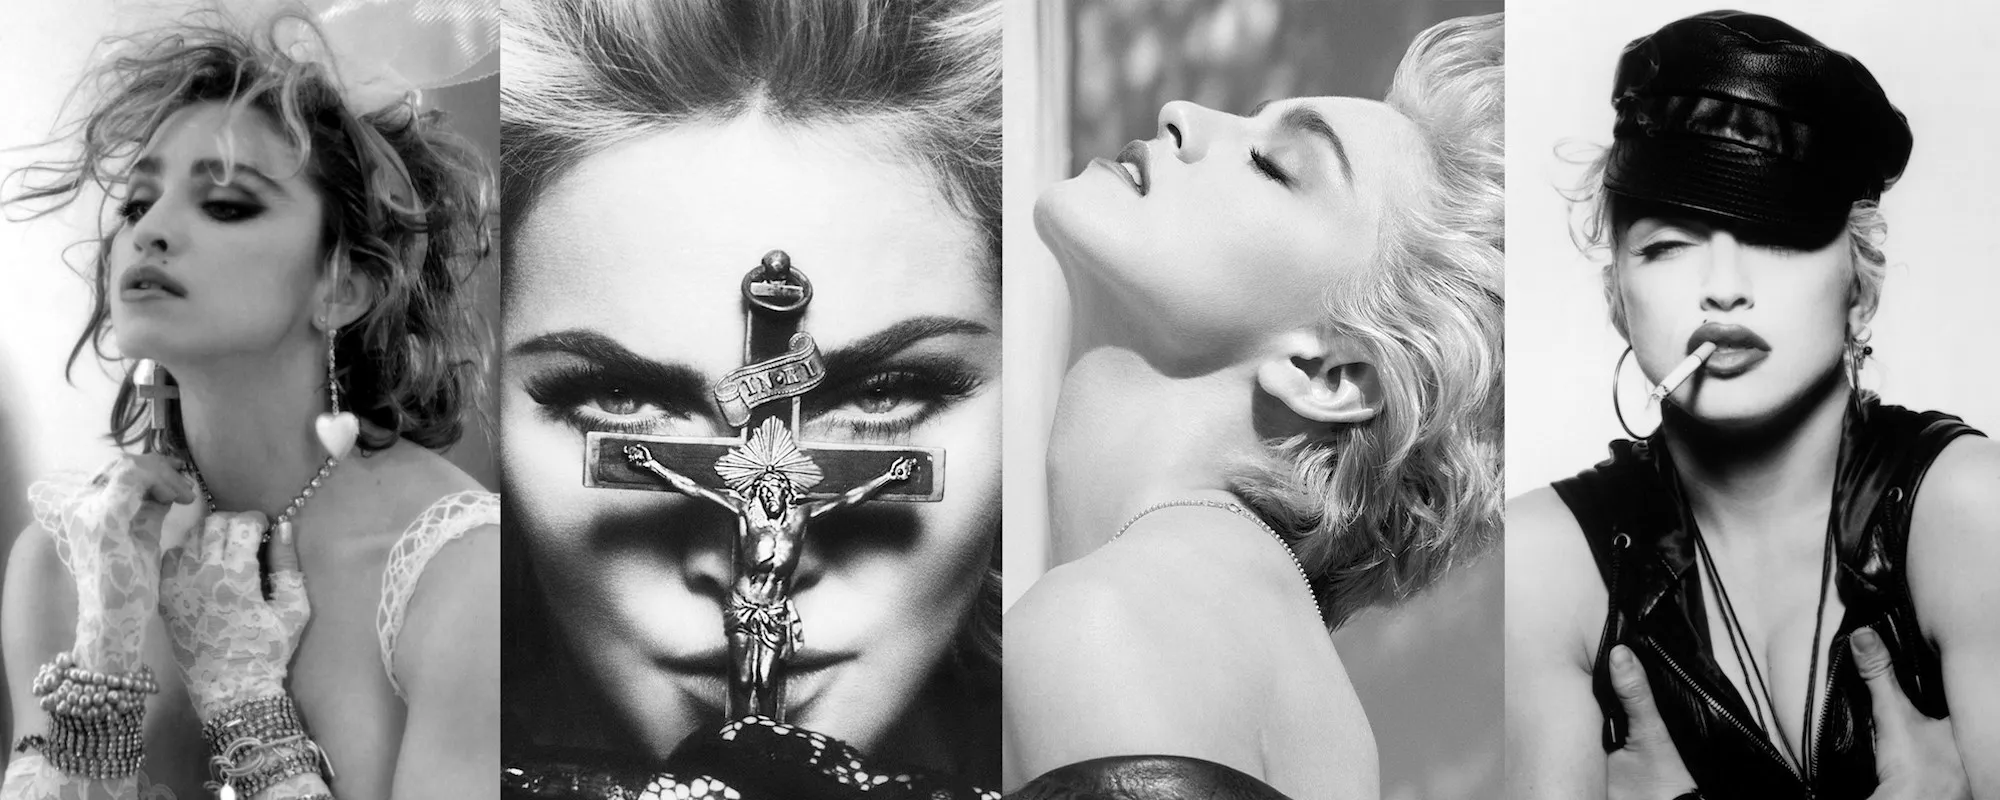 Madonna Becomes First Female Artist to Have Top 10 Albums in Every Decade Since the 1980s